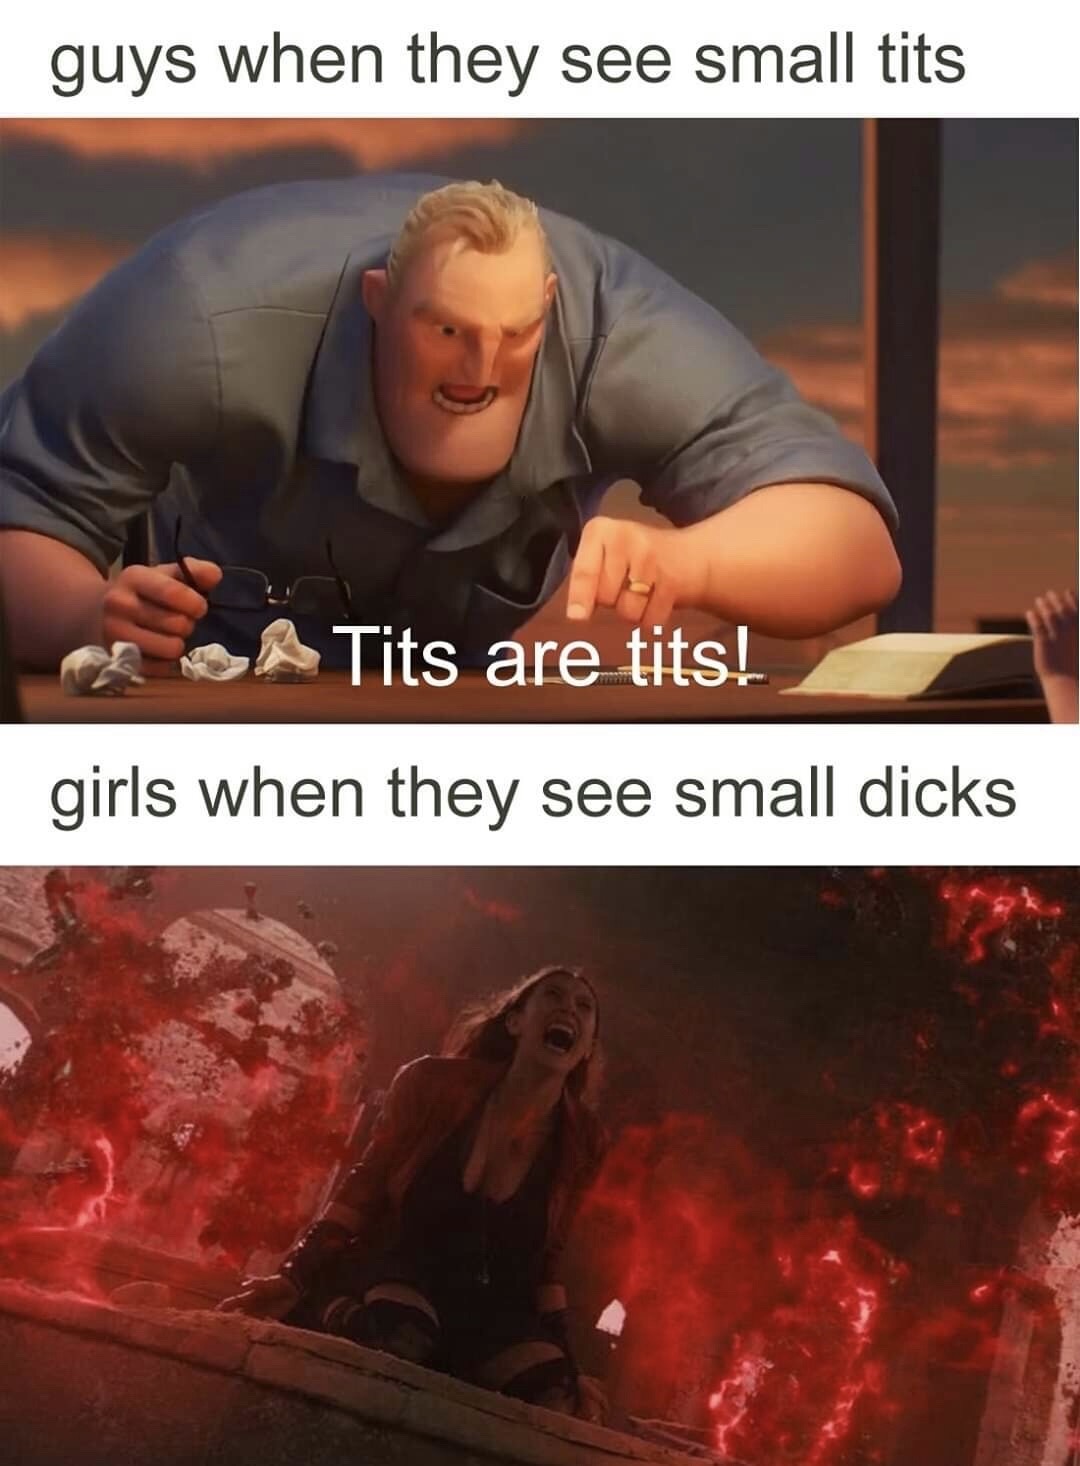 happy new years gay meme - guys when they see small tits Tits are tits! girls when they see small dicks